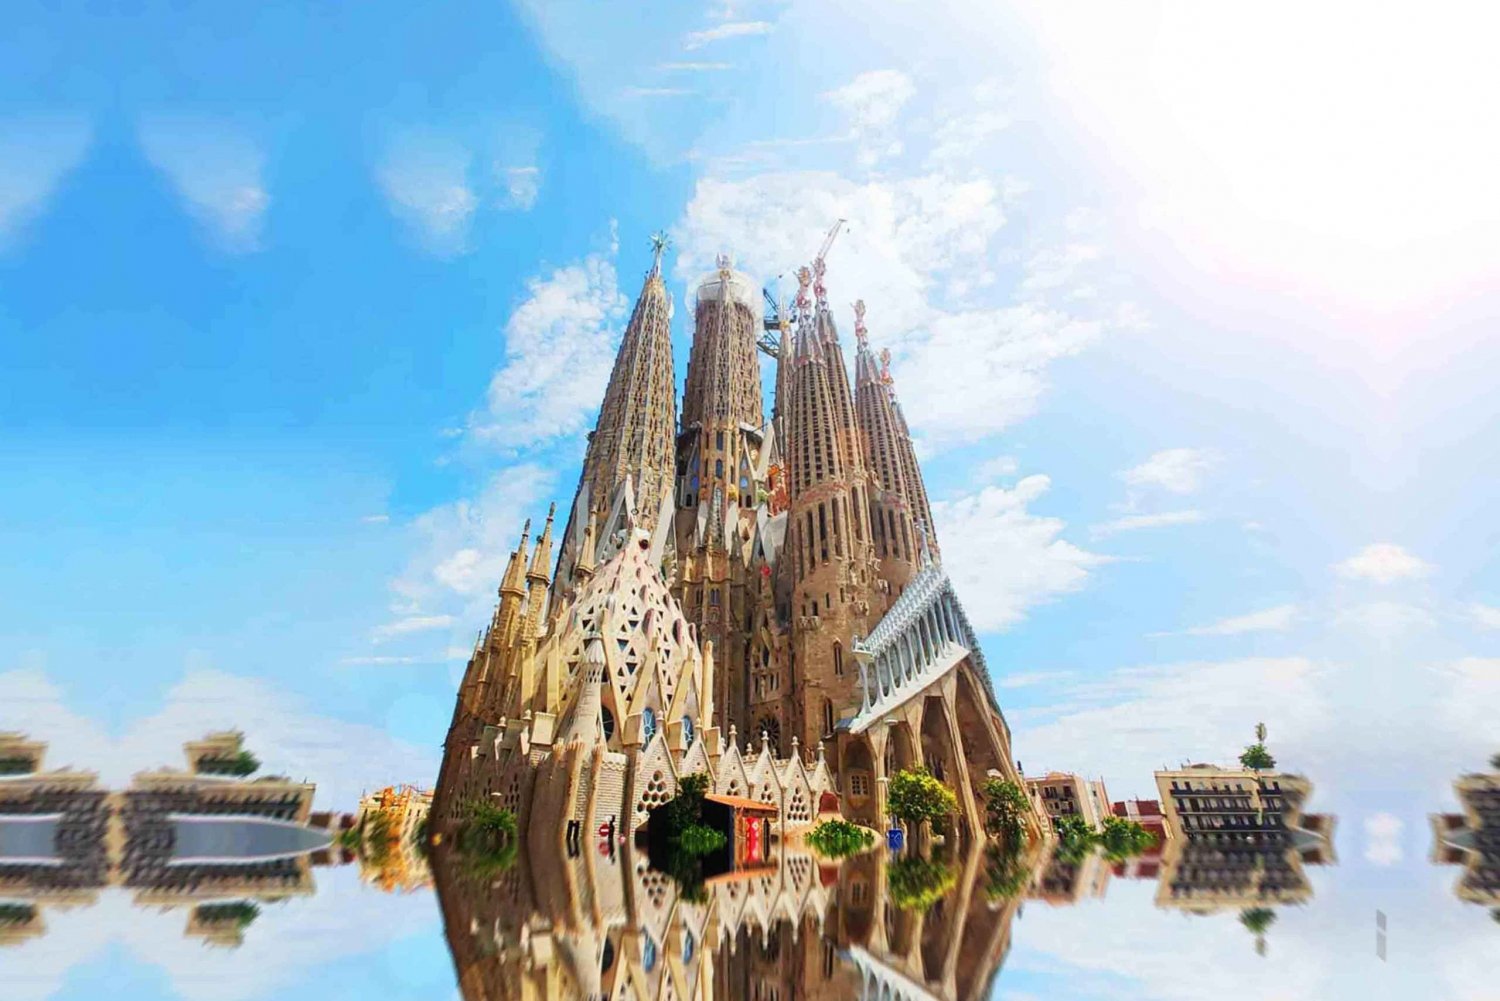 Tickets & Guide: Lights and shadows of the Sagrada Familia